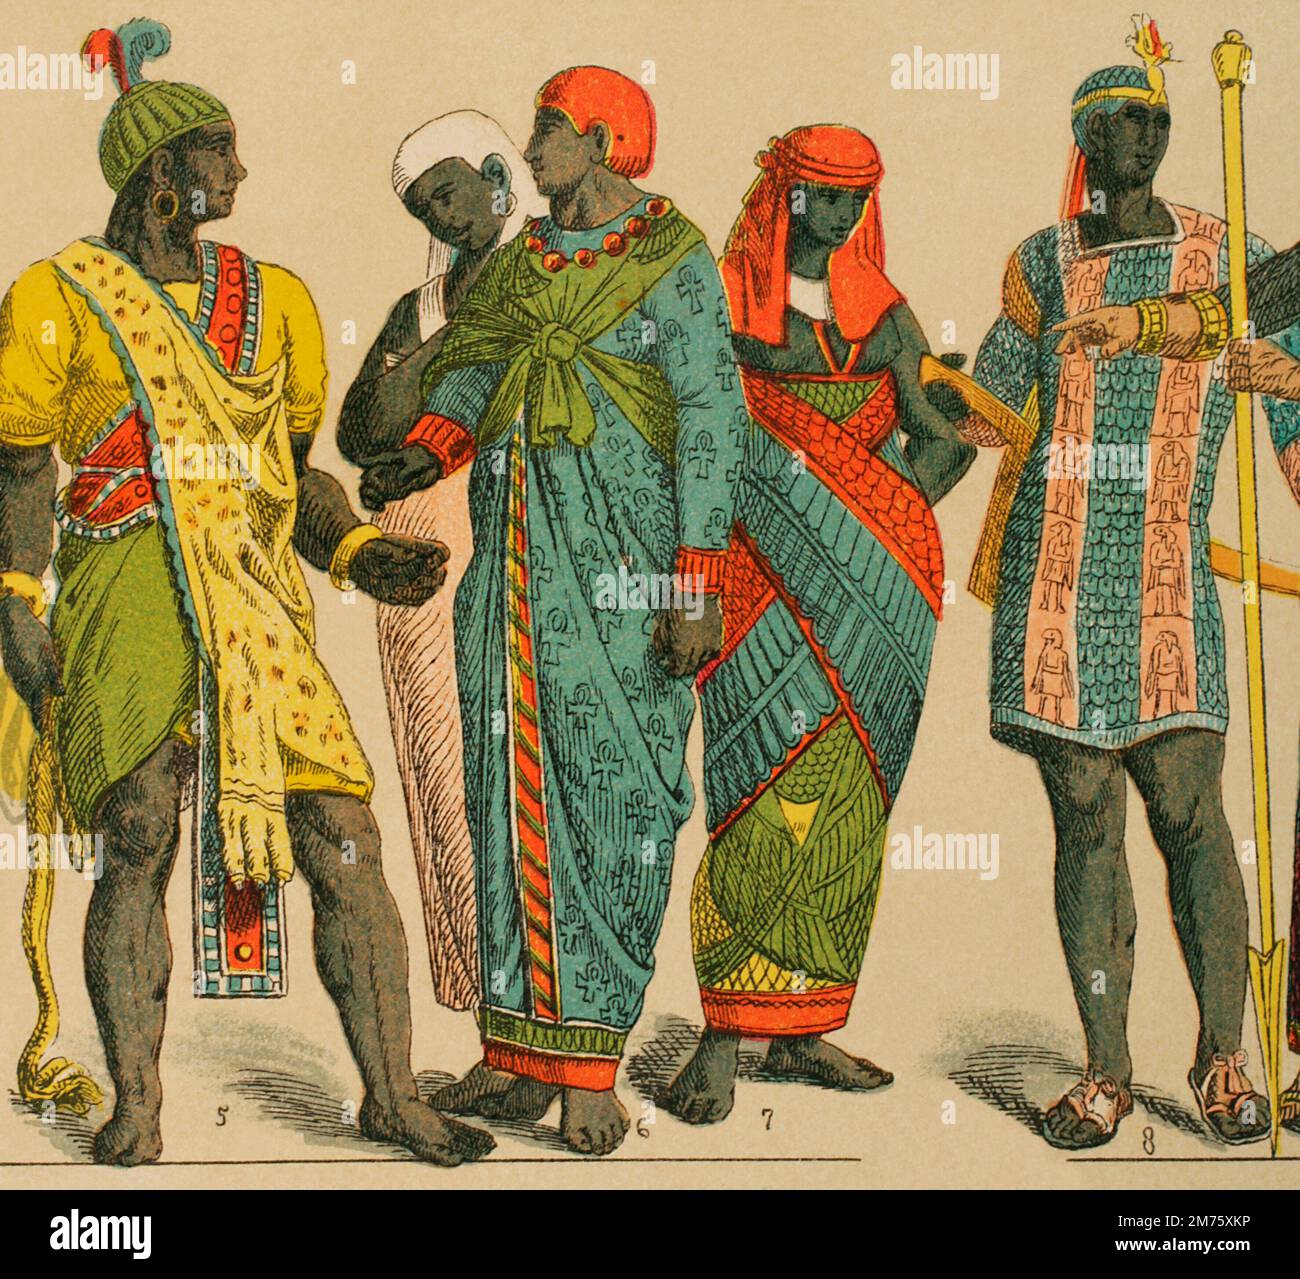 Ancient Egypt. From left to right; 5: animal skin used as a cape, 6: costume adhered to the body with long narrow sleeves, 7: priestess in ceremonial costume, 8: breastplate or chain-mail of scales. Chromolithography. 'Historia Universal' (Universal History), by Cesar Cantu. Volume I, 1881. Stock Photo